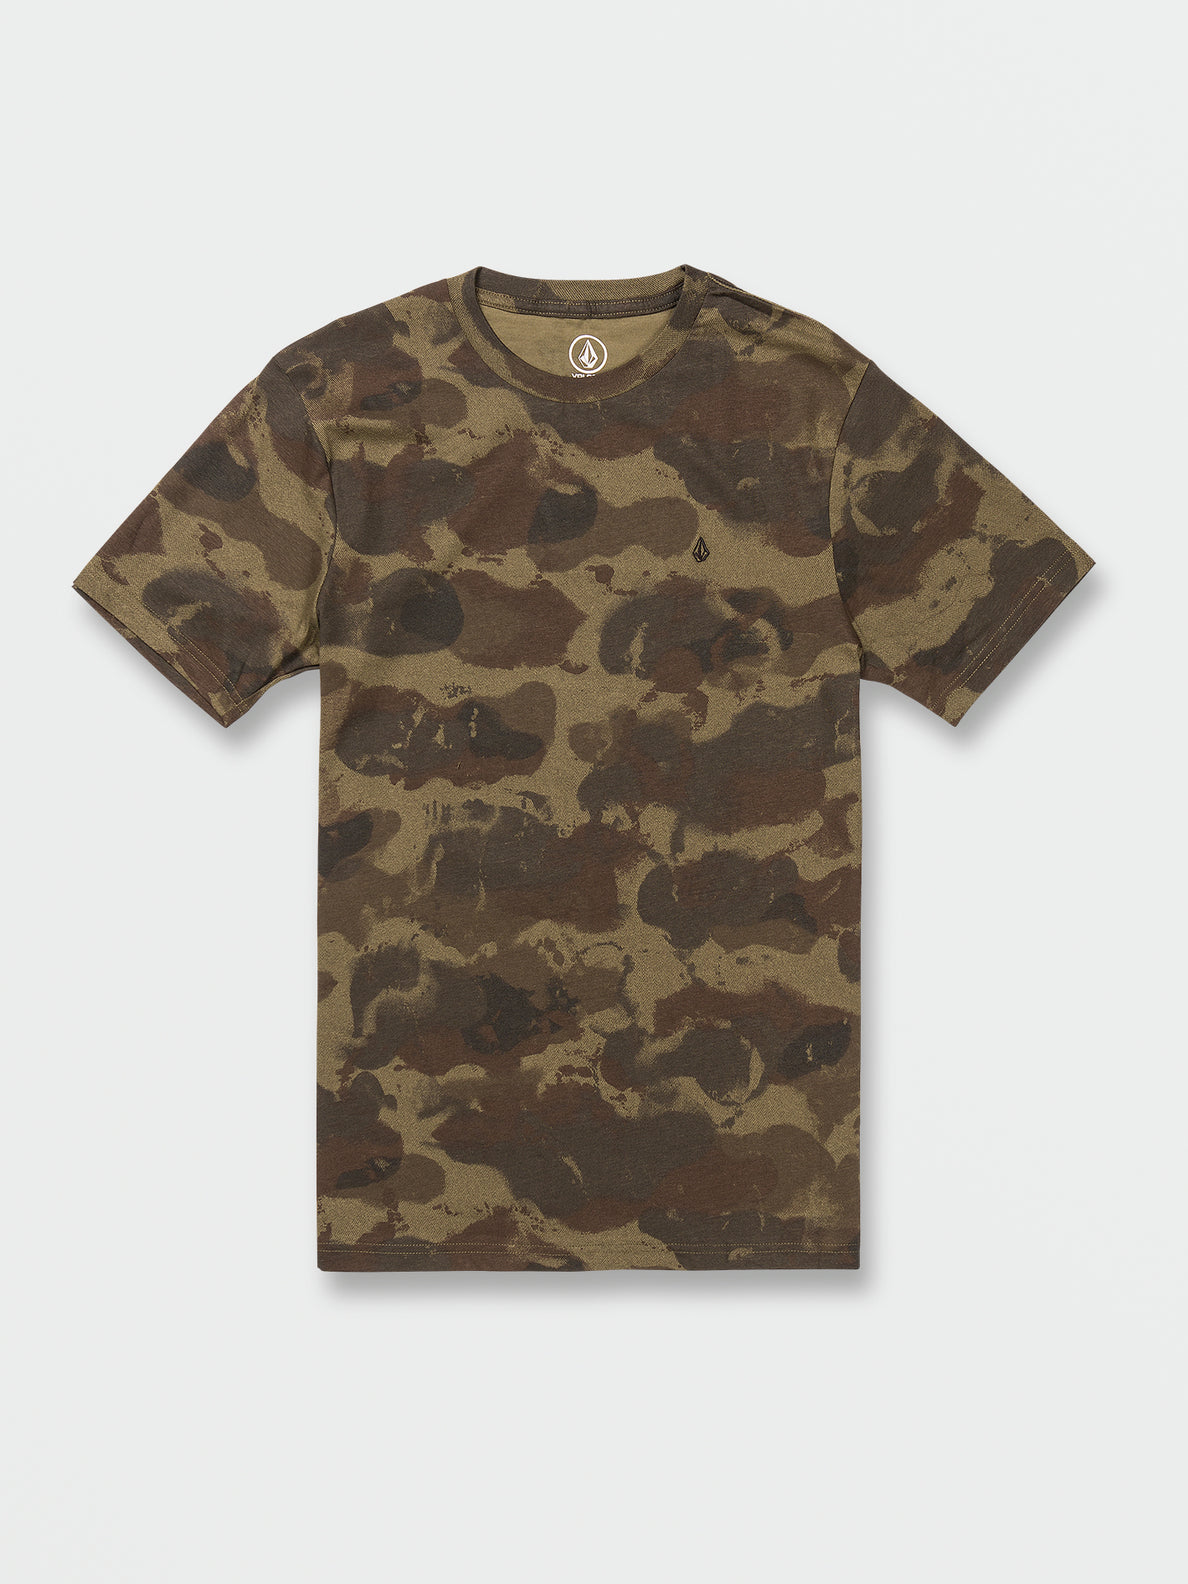 Parables Crew Tee - Camouflage